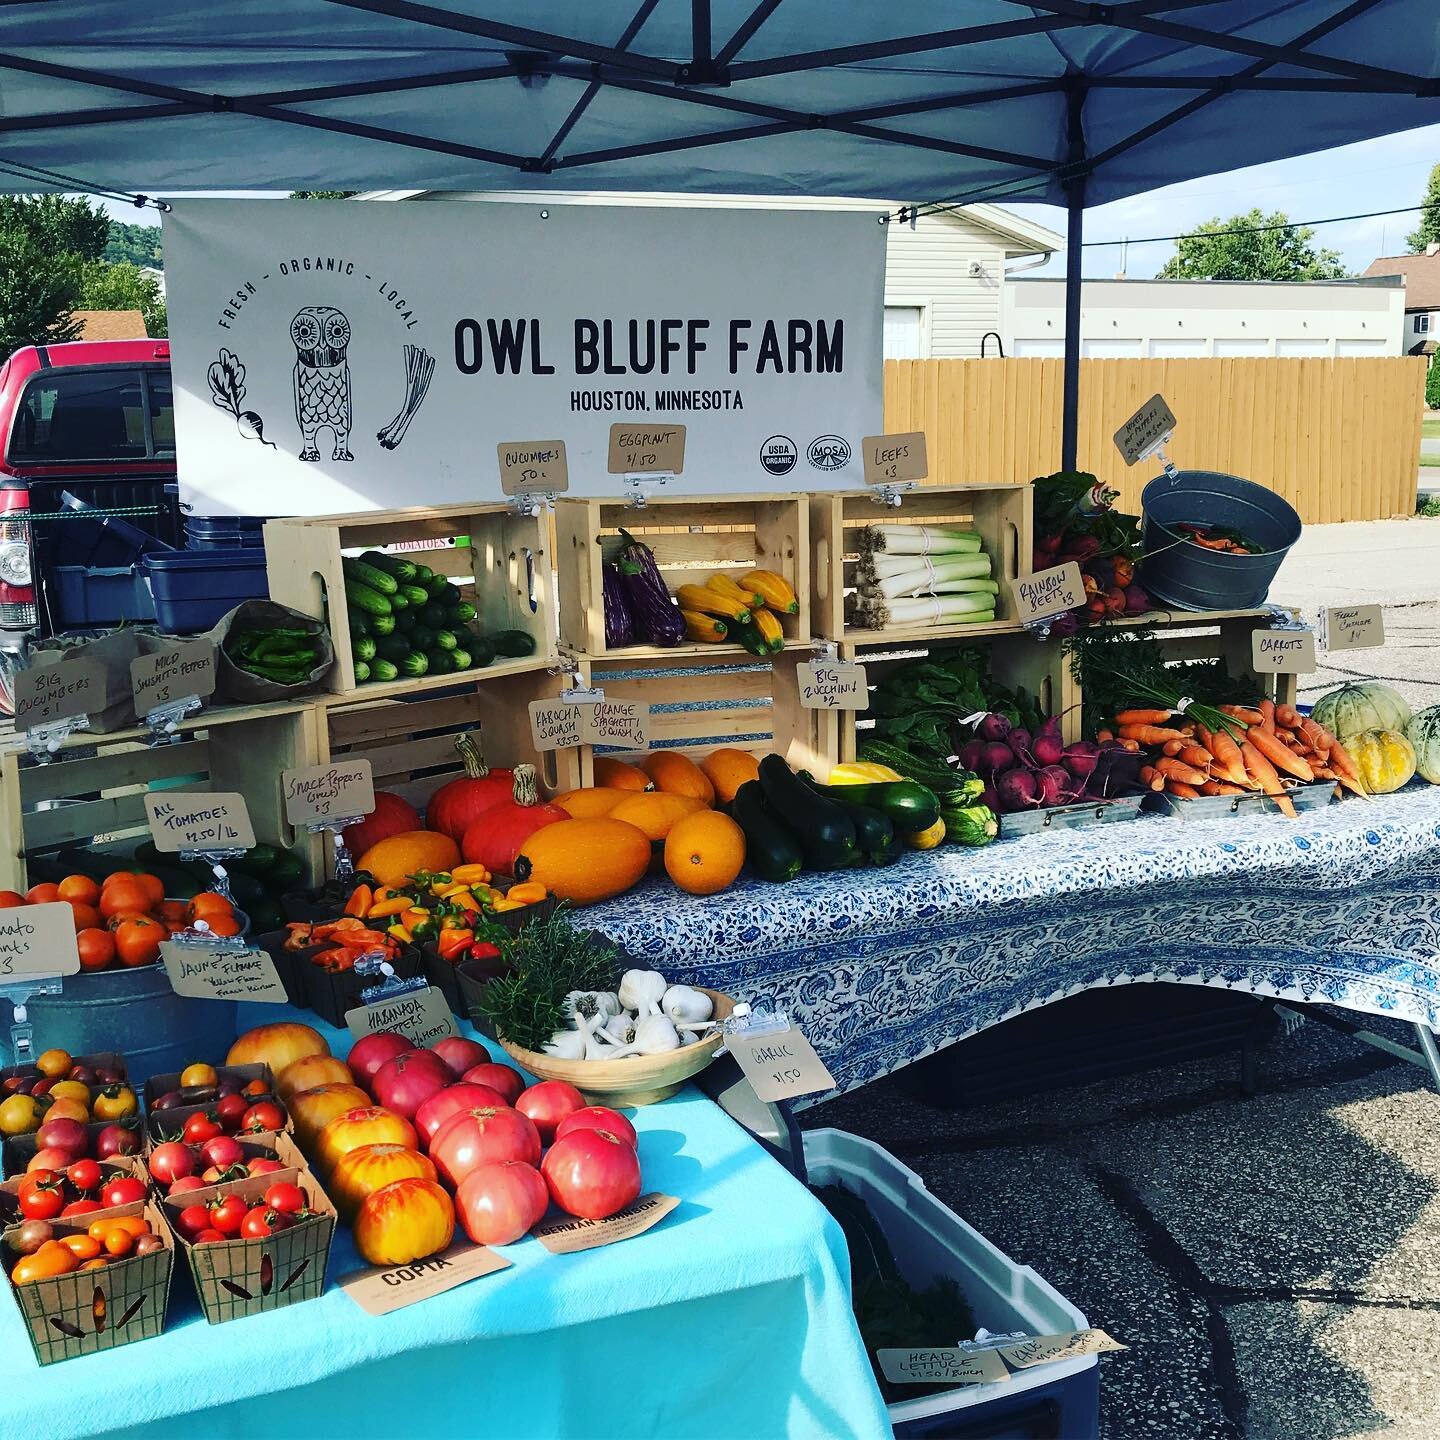 farmers market tables of tomatoes with Owl Bluff Farm sign